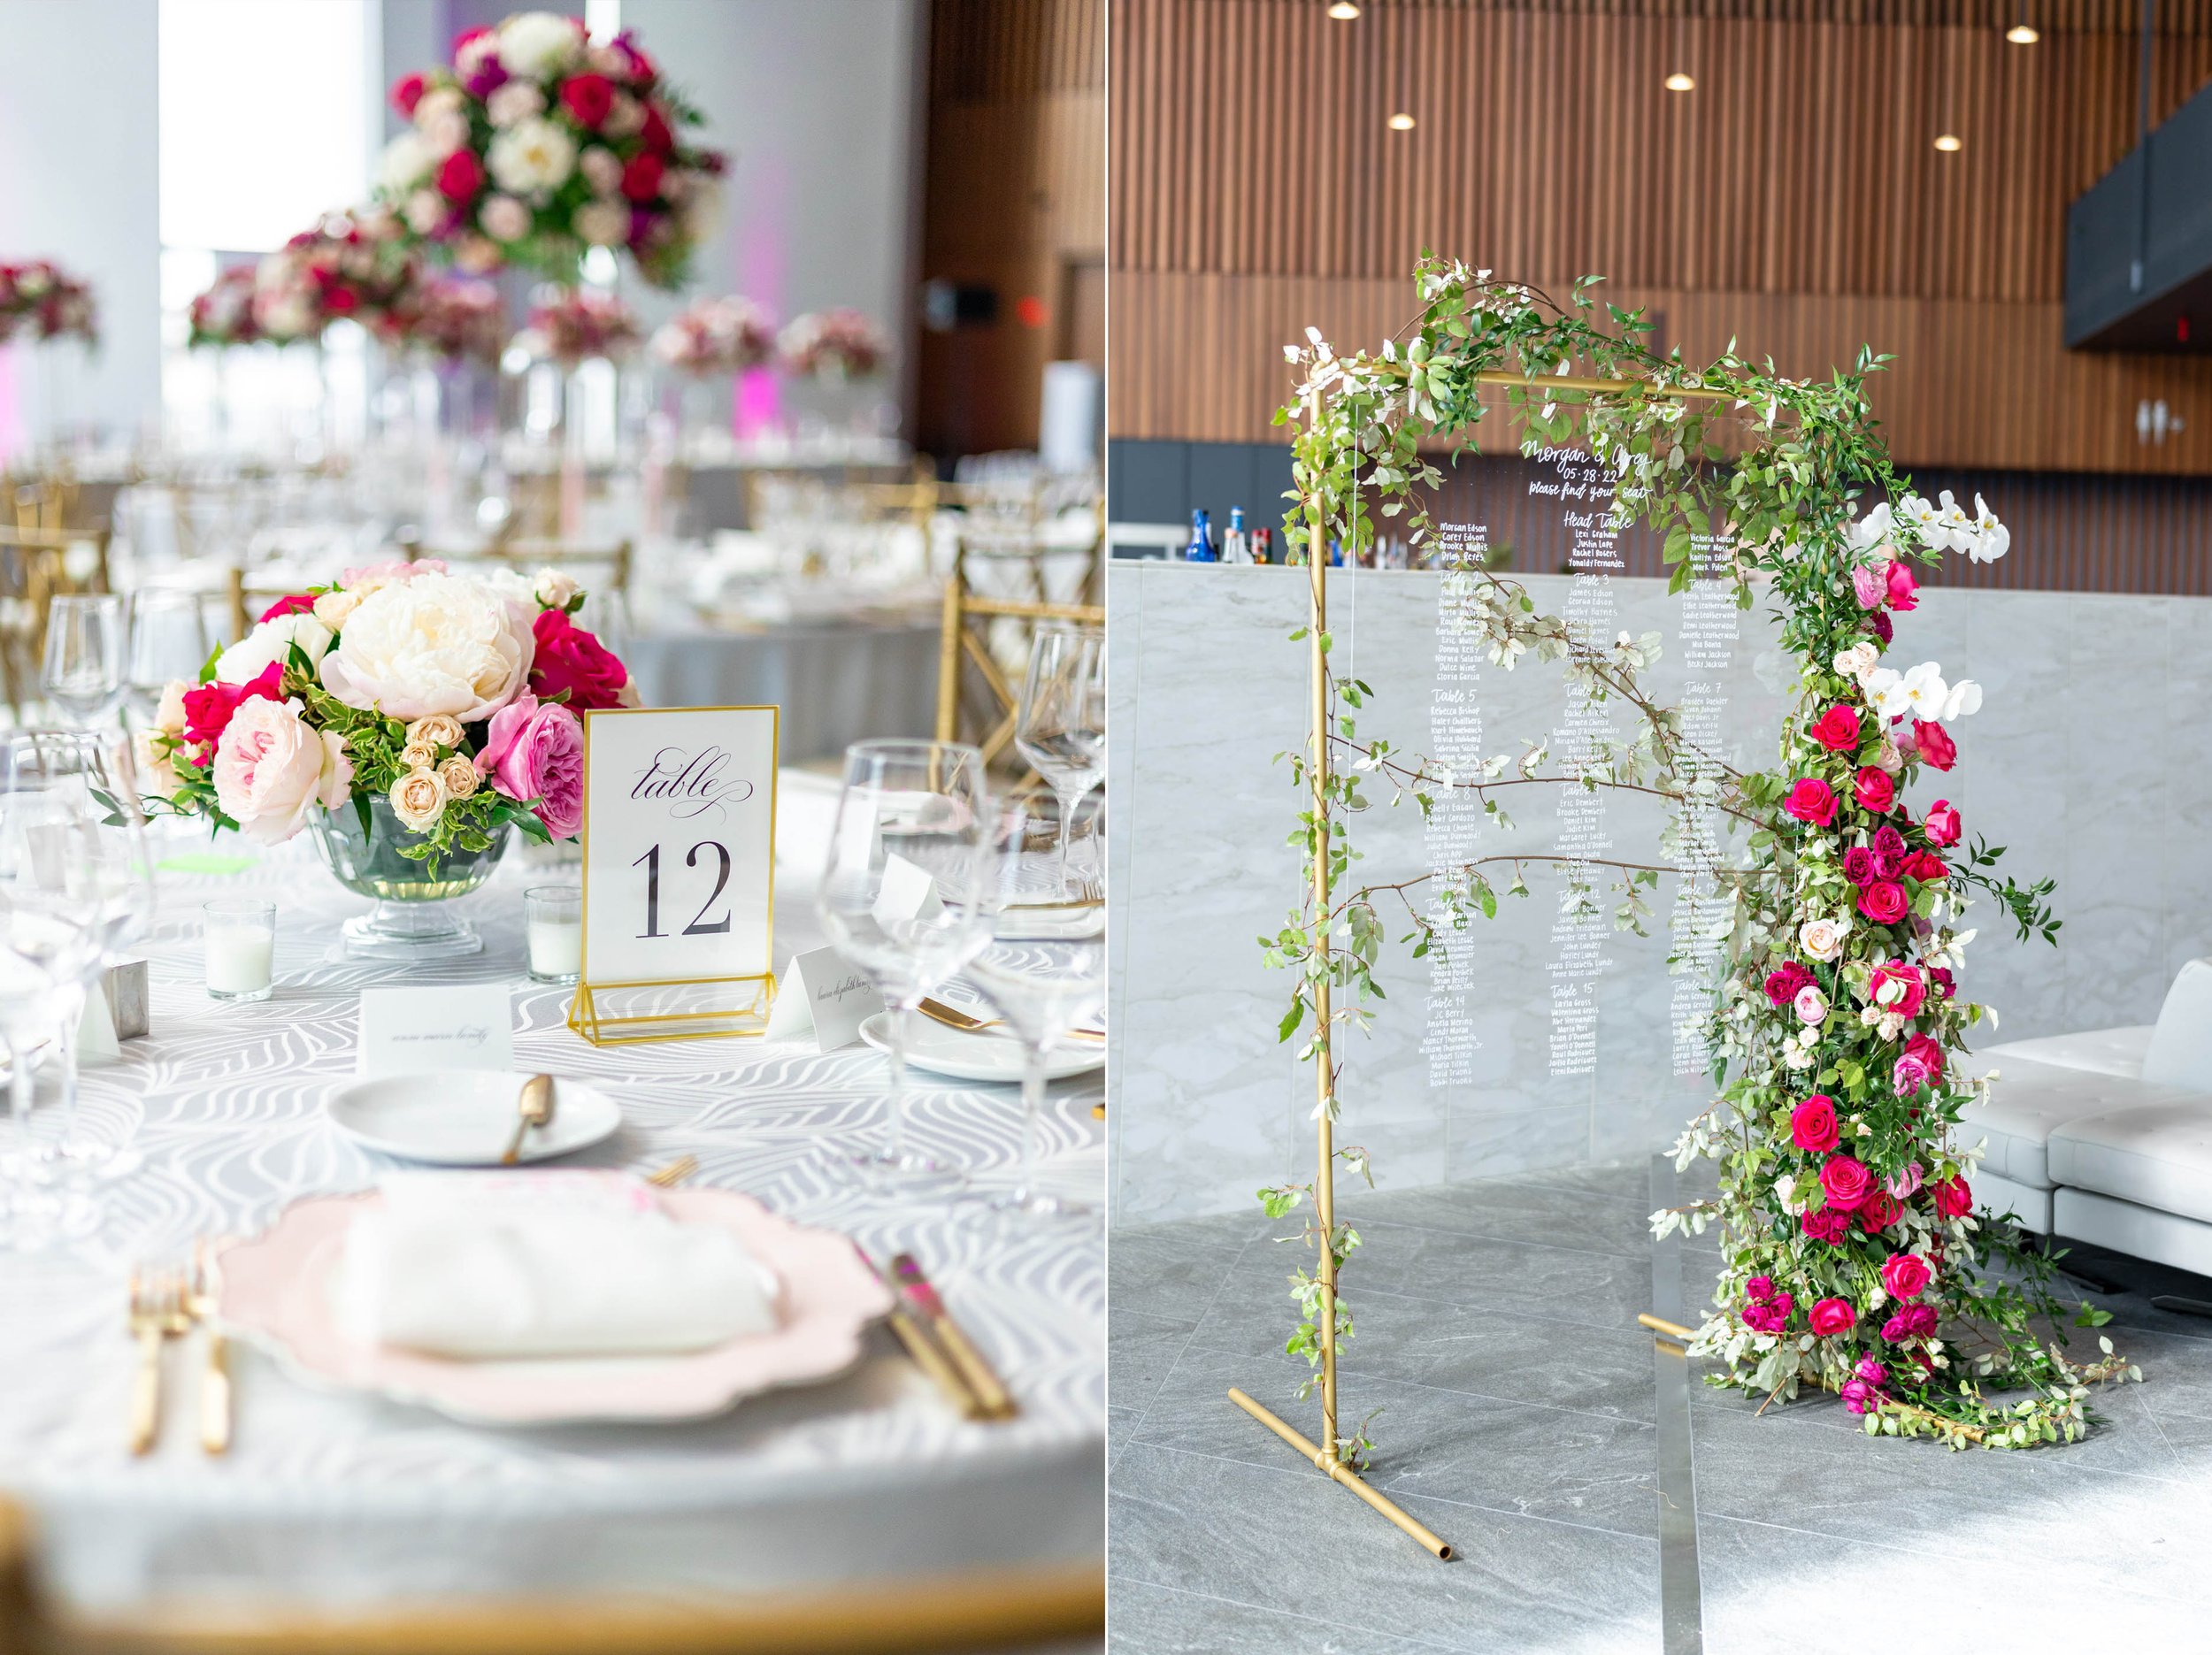 Table number and table seating chart photos with ivy and glass decor